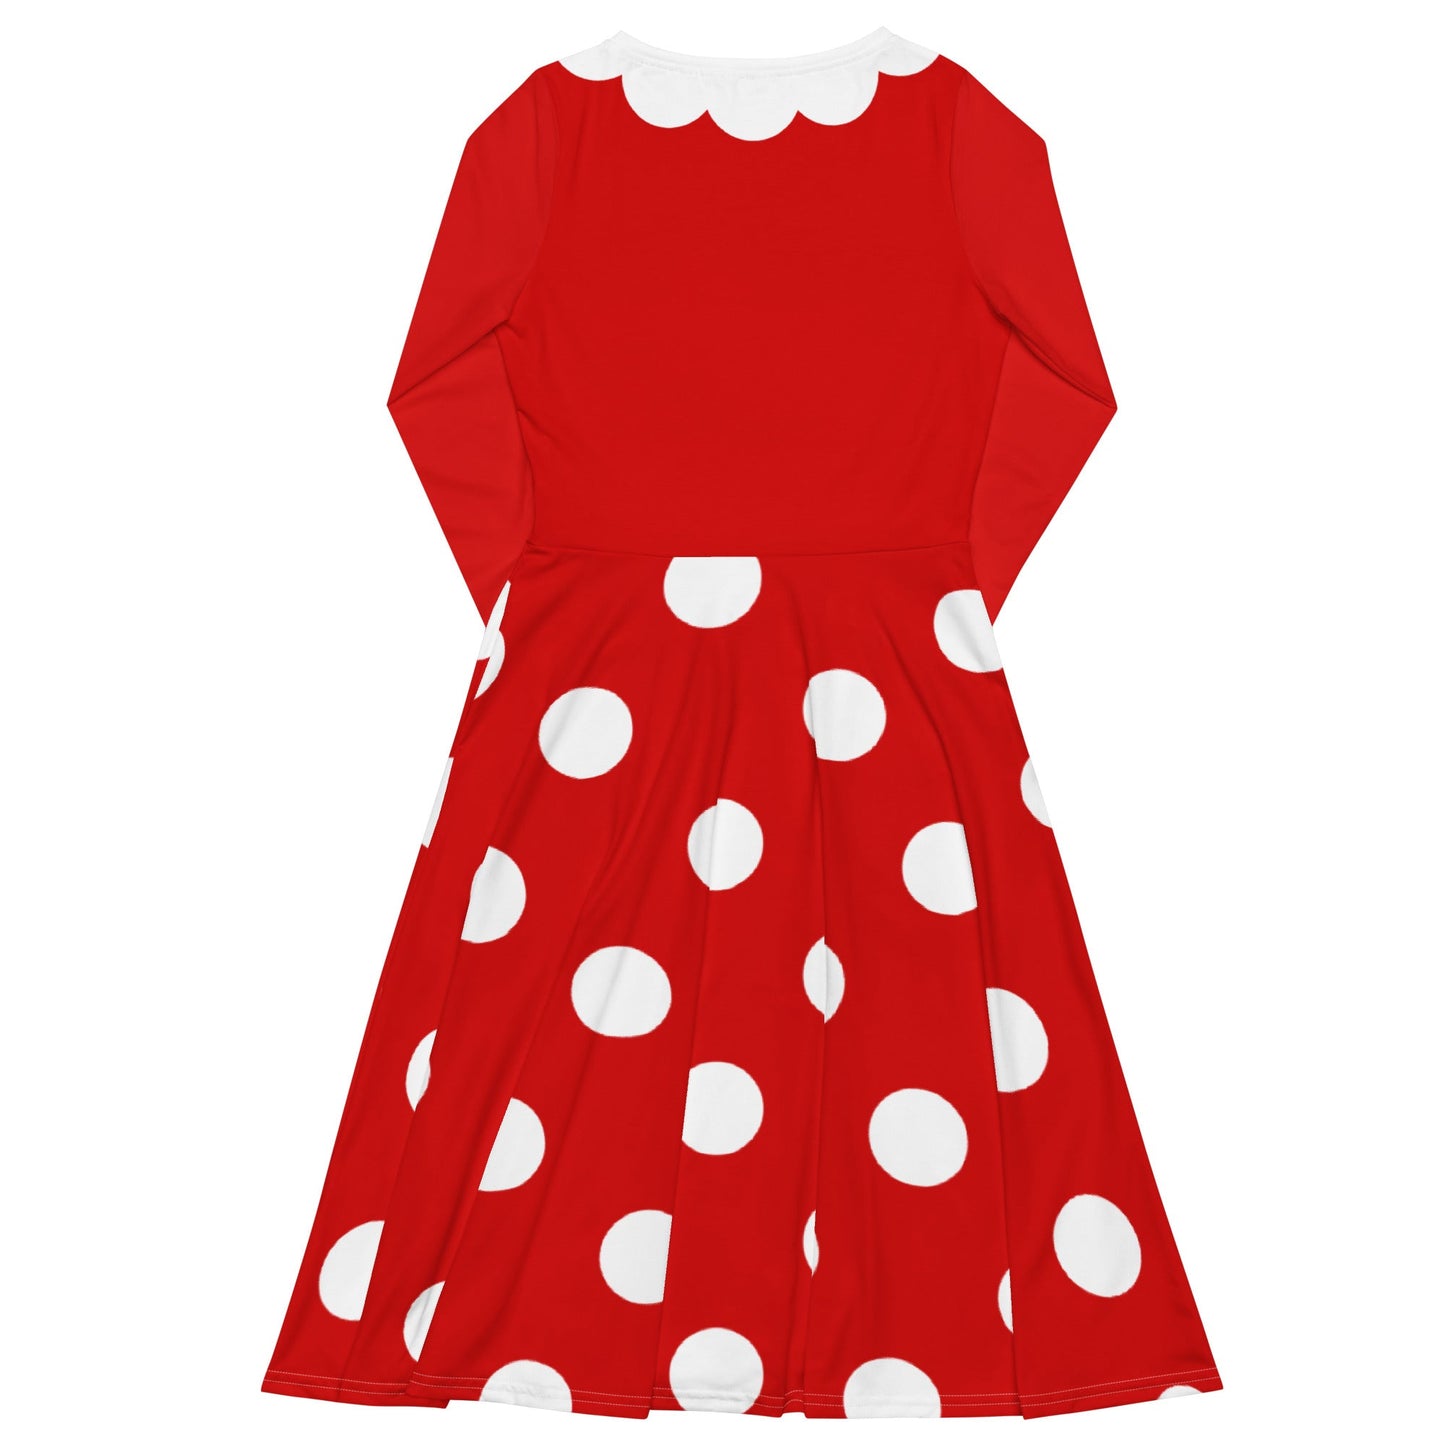 The Minnie long sleeve midi dress cosplaydisney cosplayLittle Lady Shay Boutique